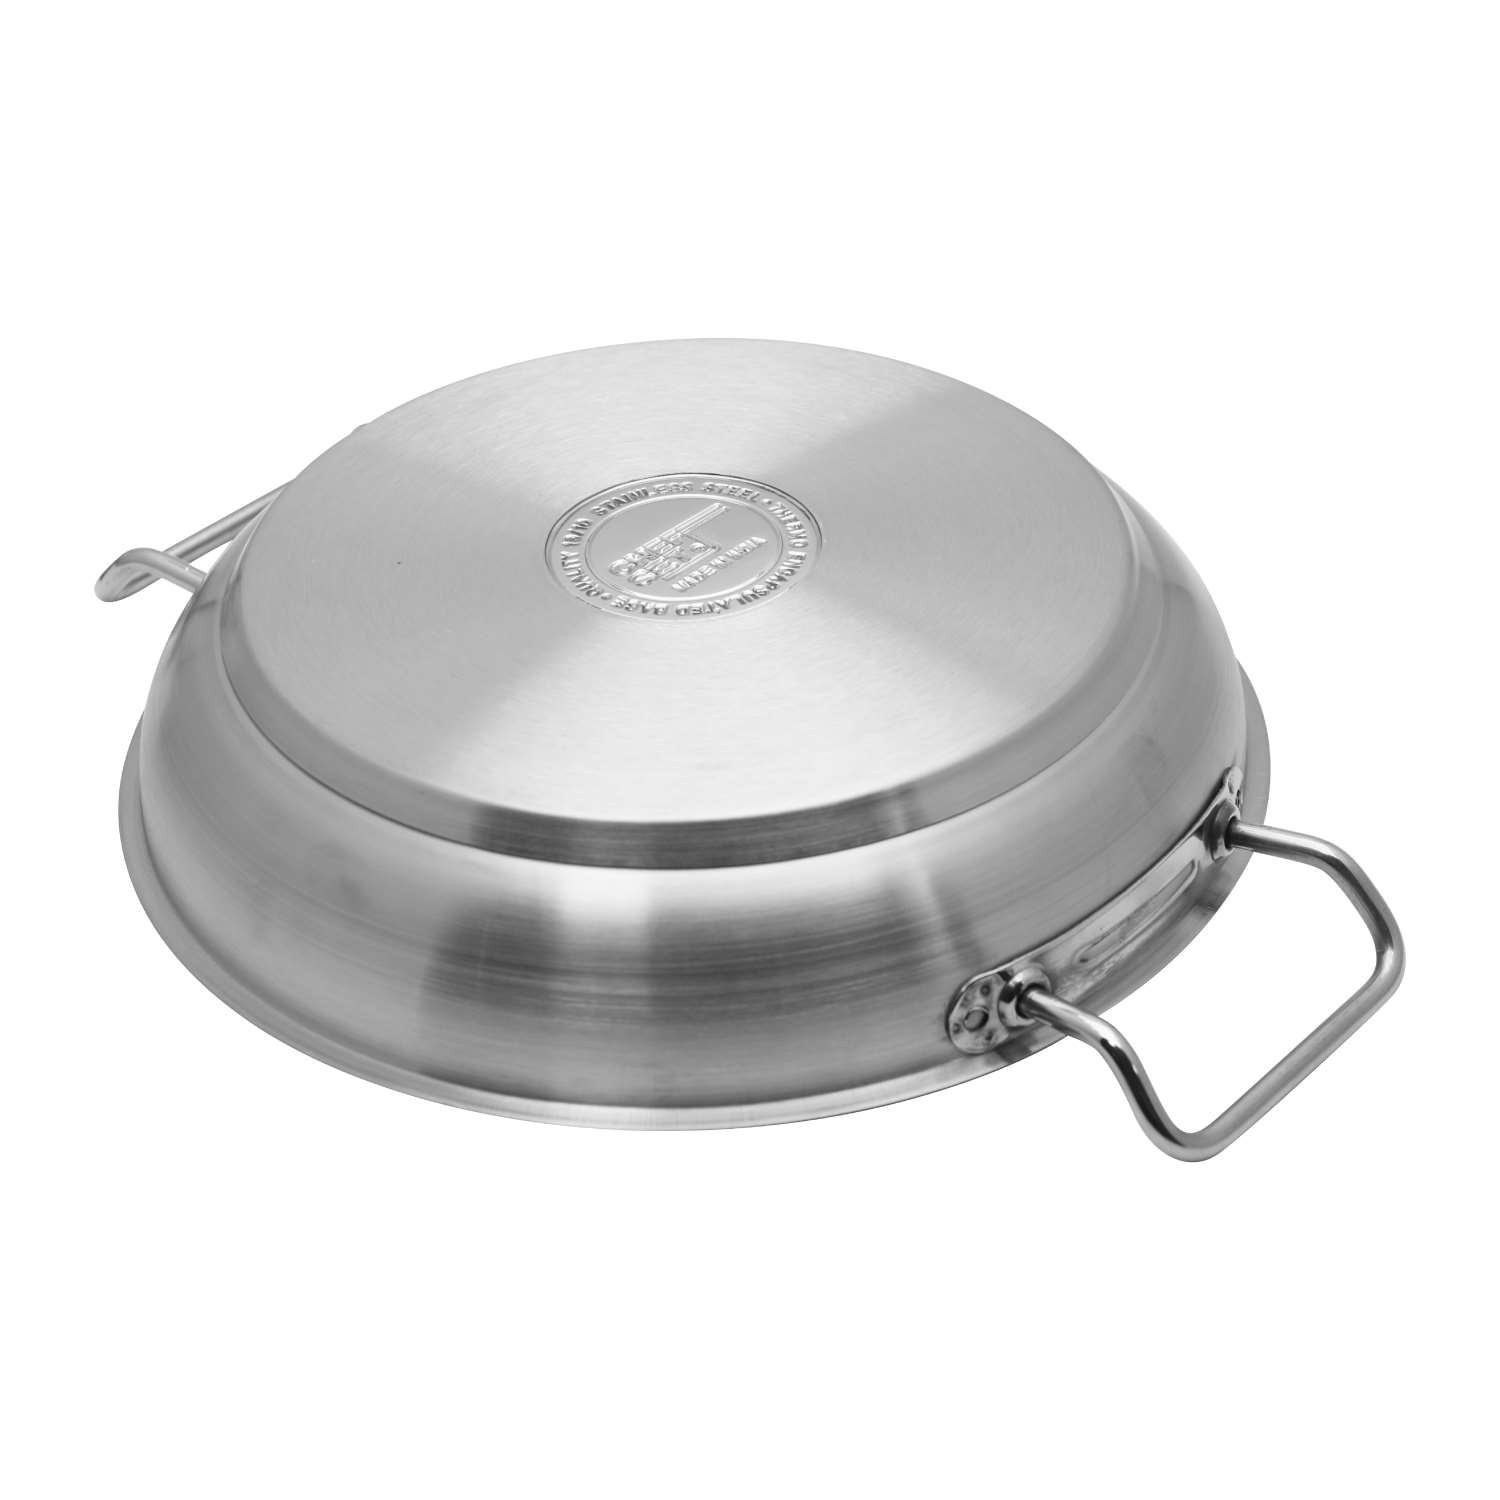 Chefset Steel Fry Pan With Side Handle 28Cm